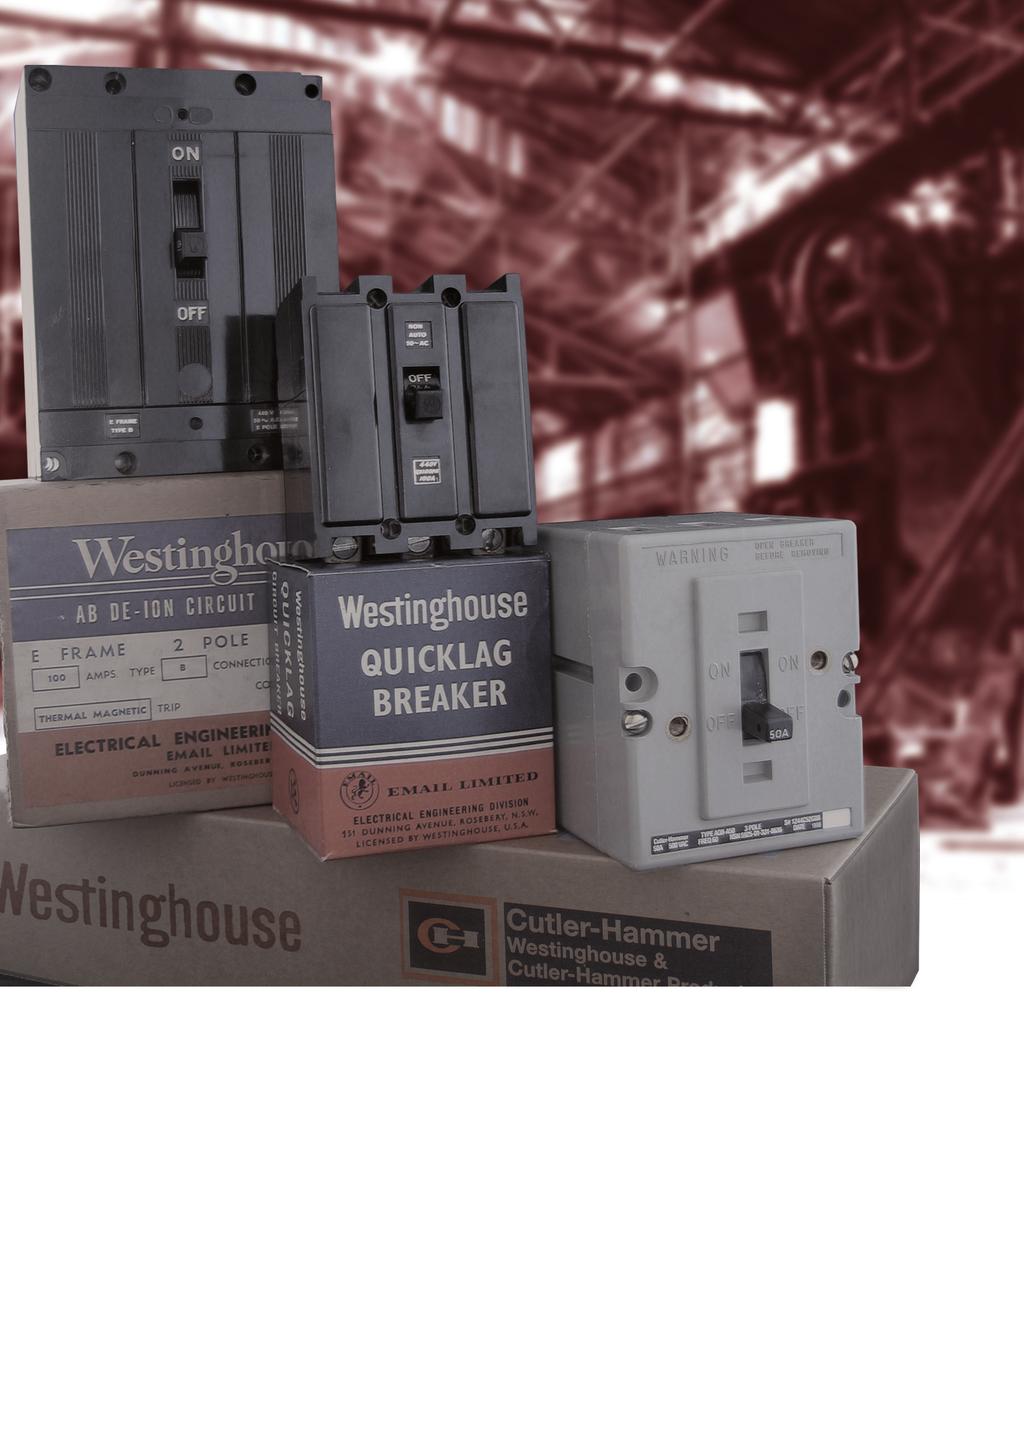 Maintaining Our Commitment Email, Westinghouse, Cutler Hammer, MEM; some of the most widely used electrical distribution & control products in Australia over